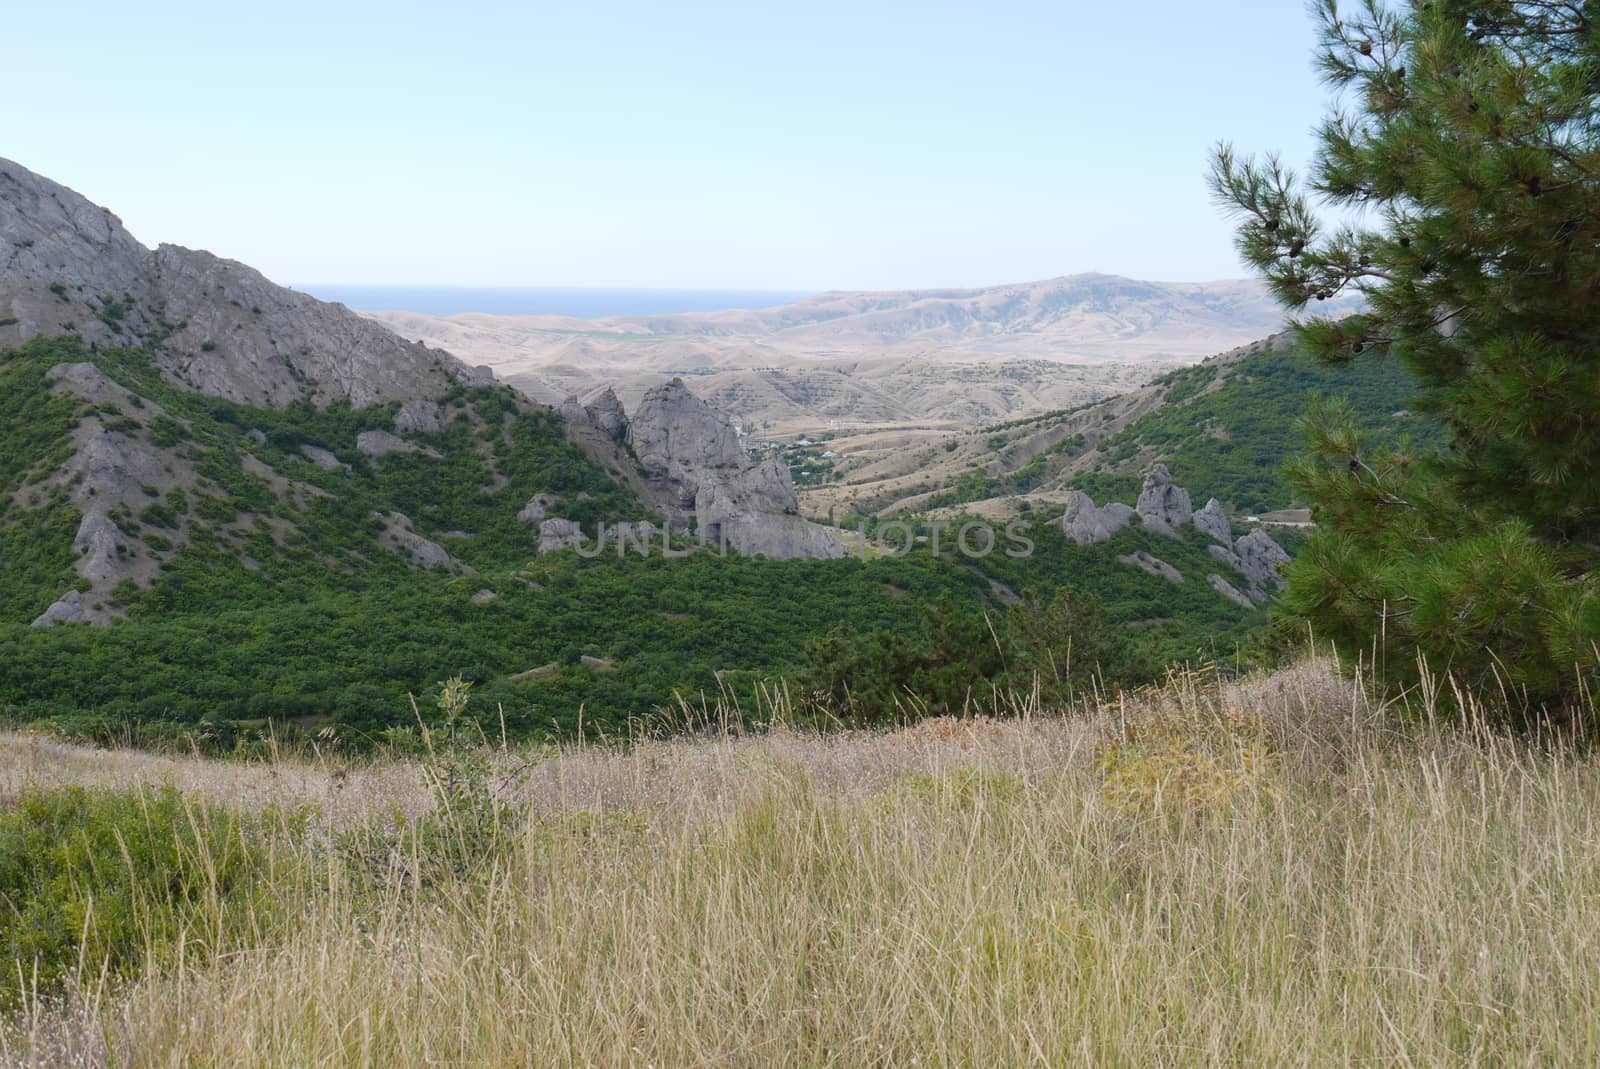 View from the top to the green valley with deciduous trees and the nearby mountain ranges